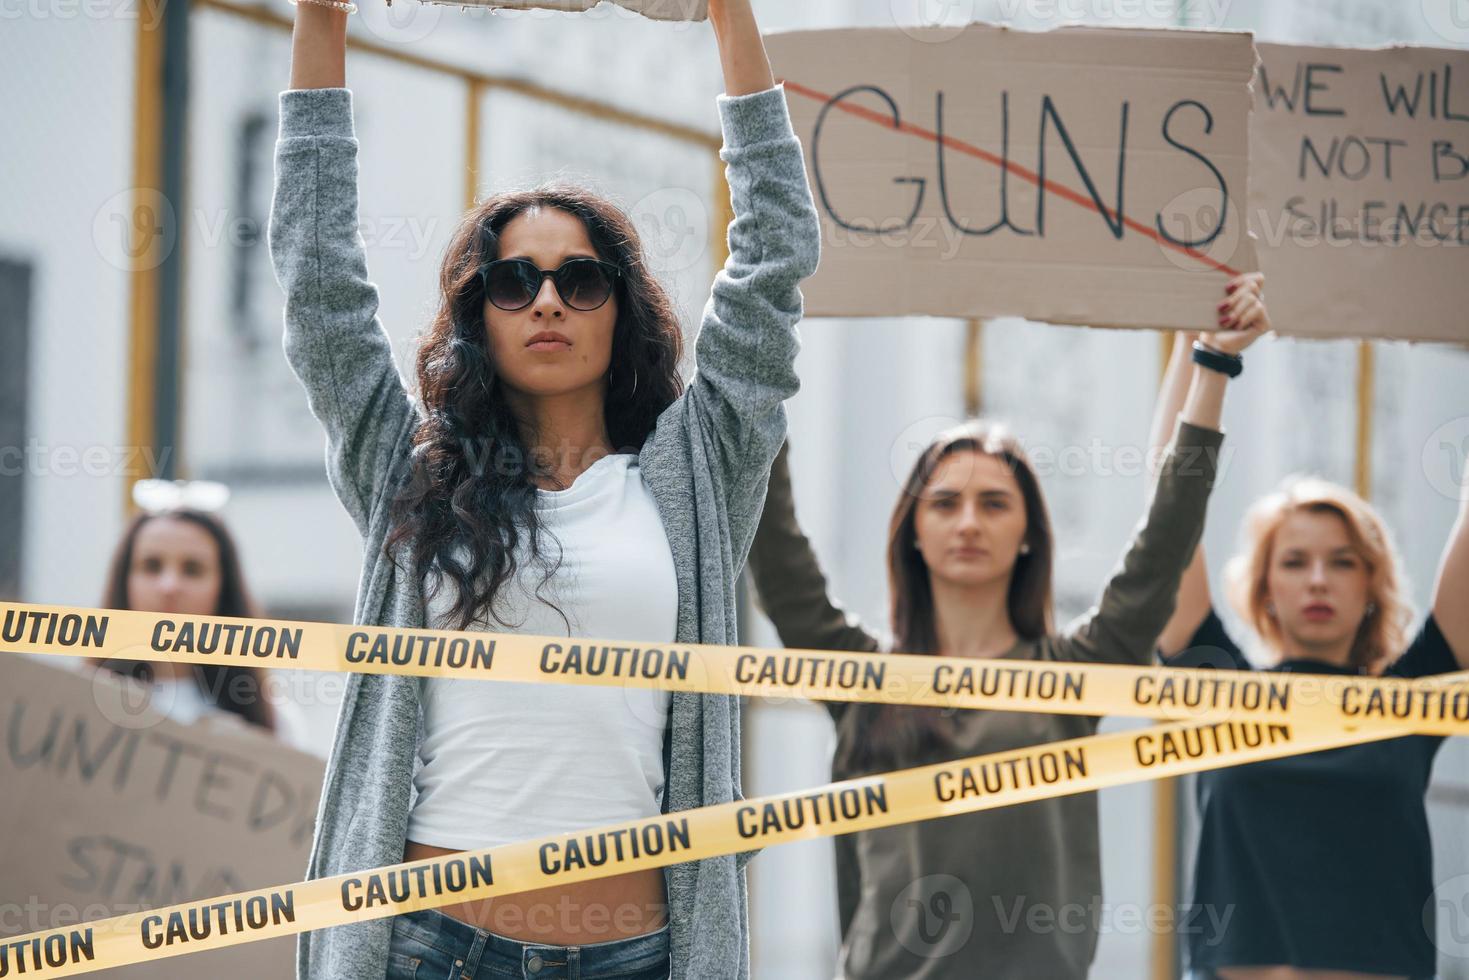 Word guns is crossed out. Group of feminist women have protest for their rights outdoors photo